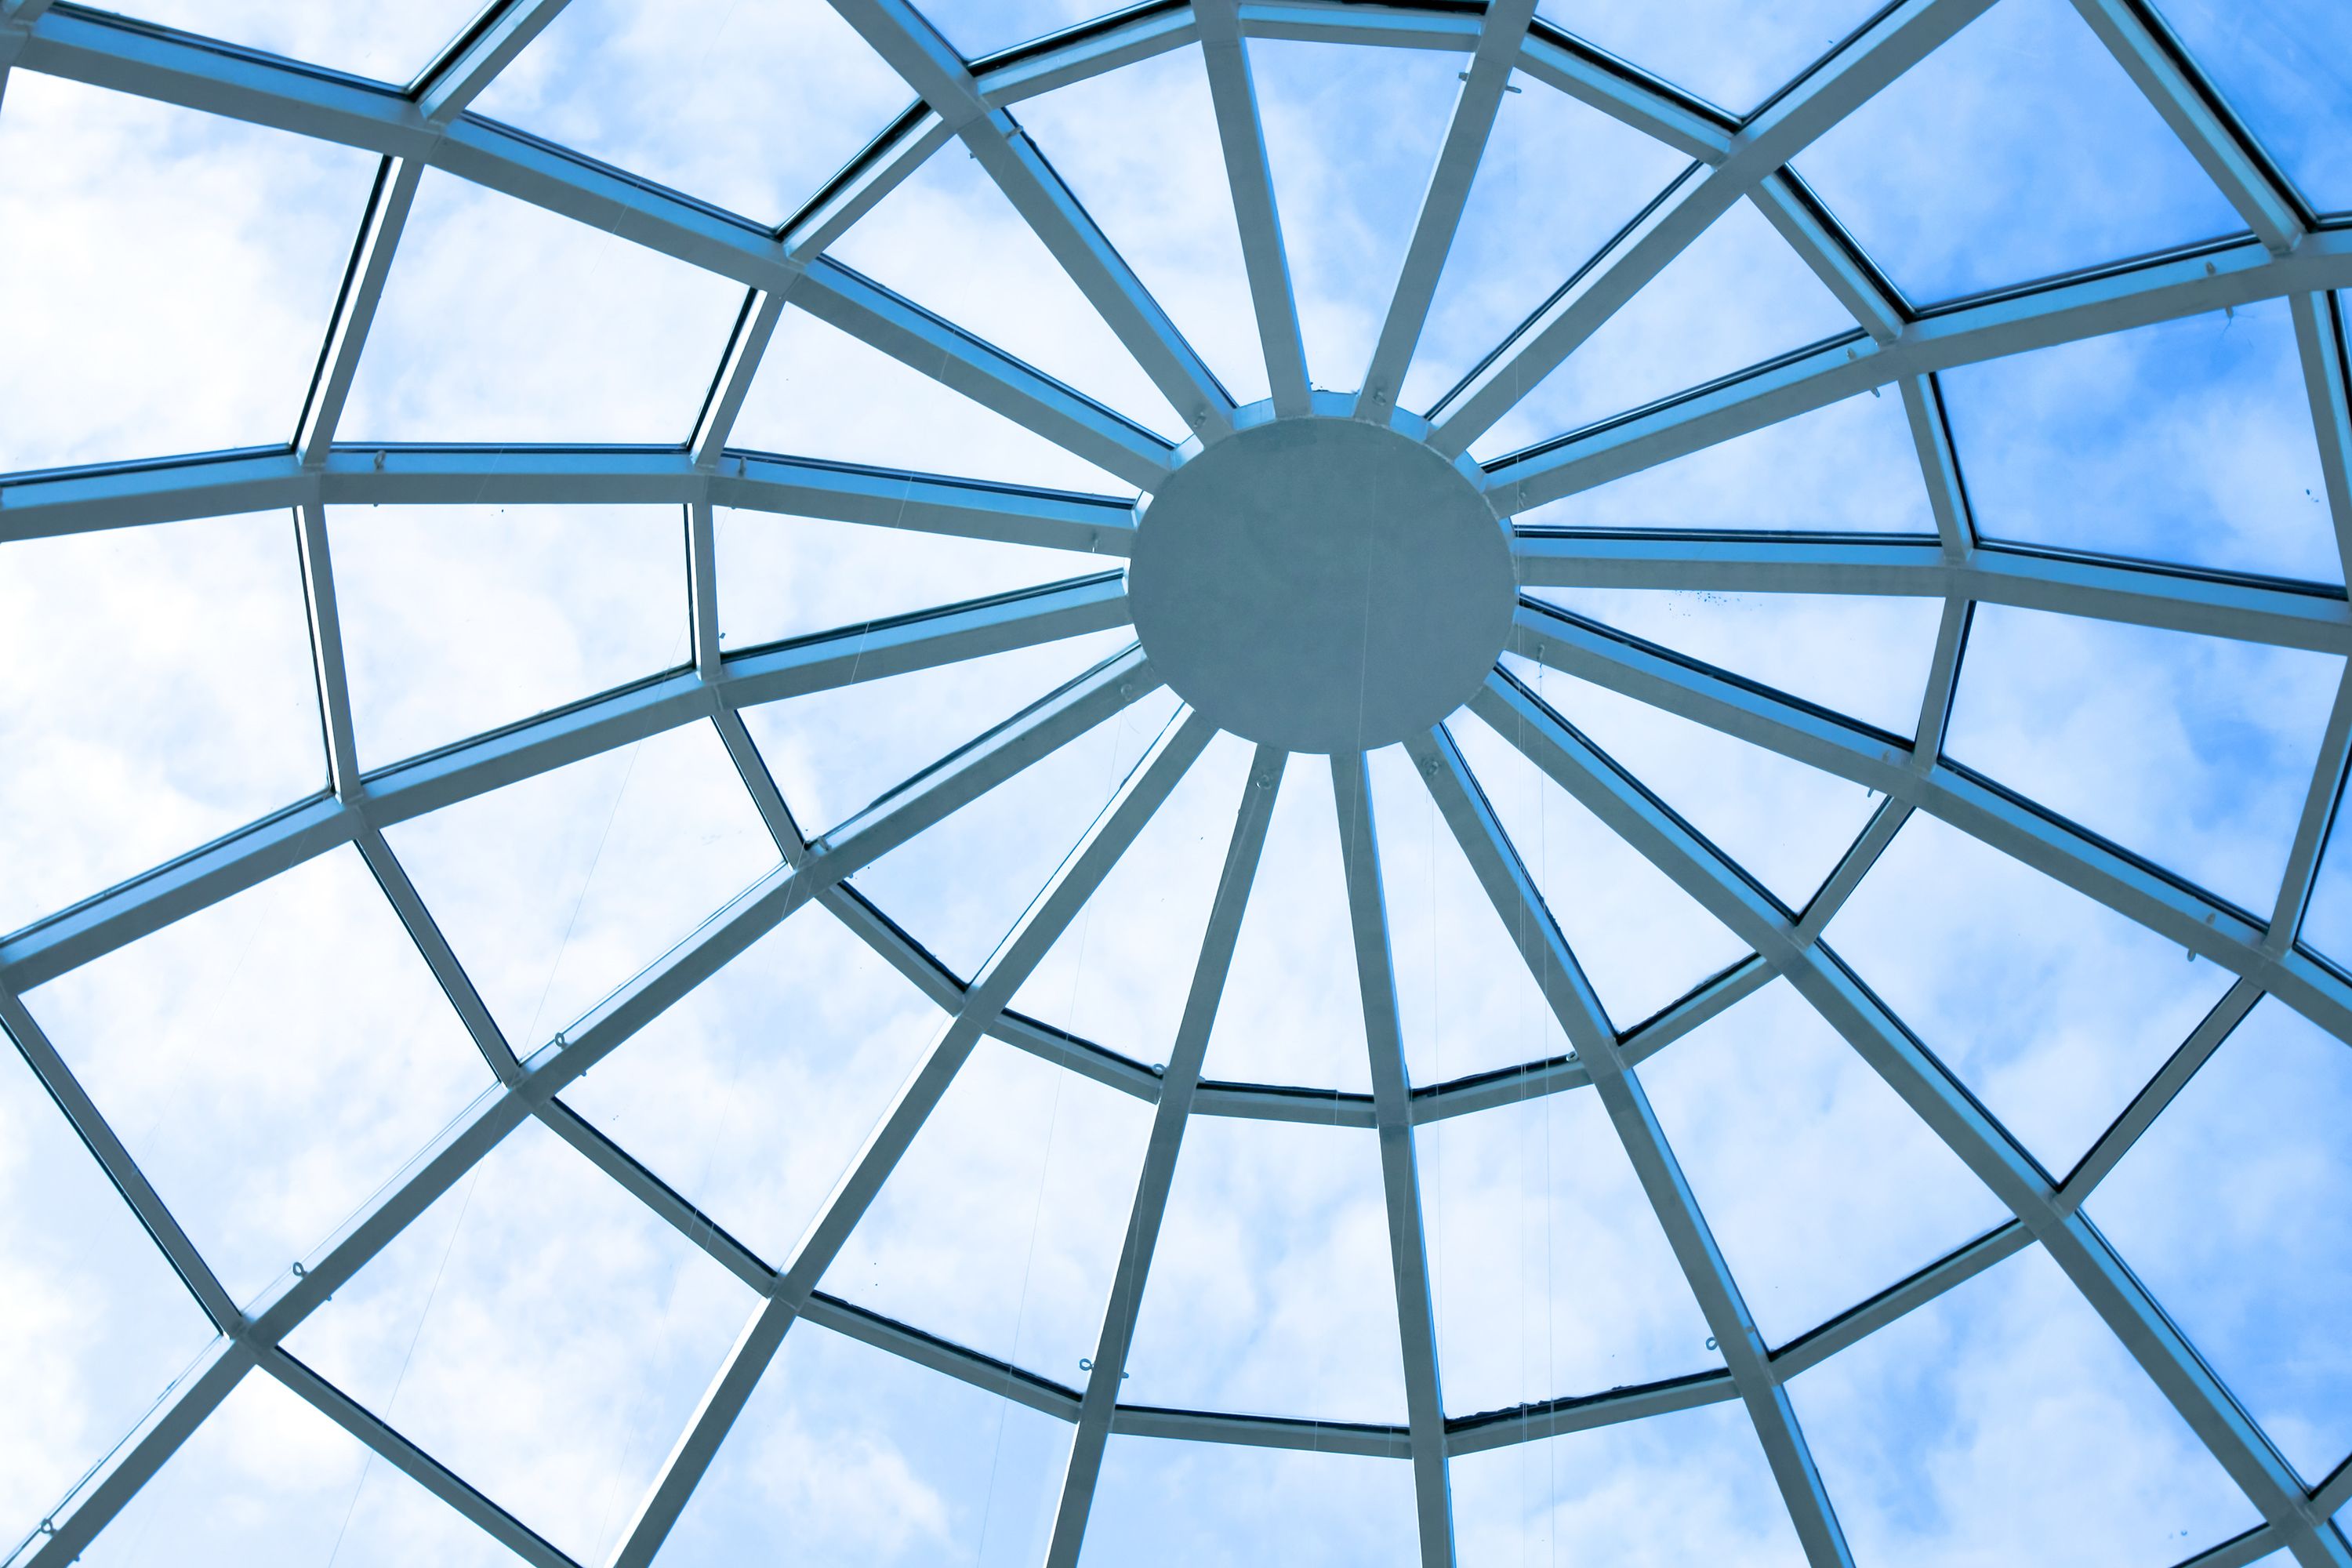 Looking up through an arched glass roof